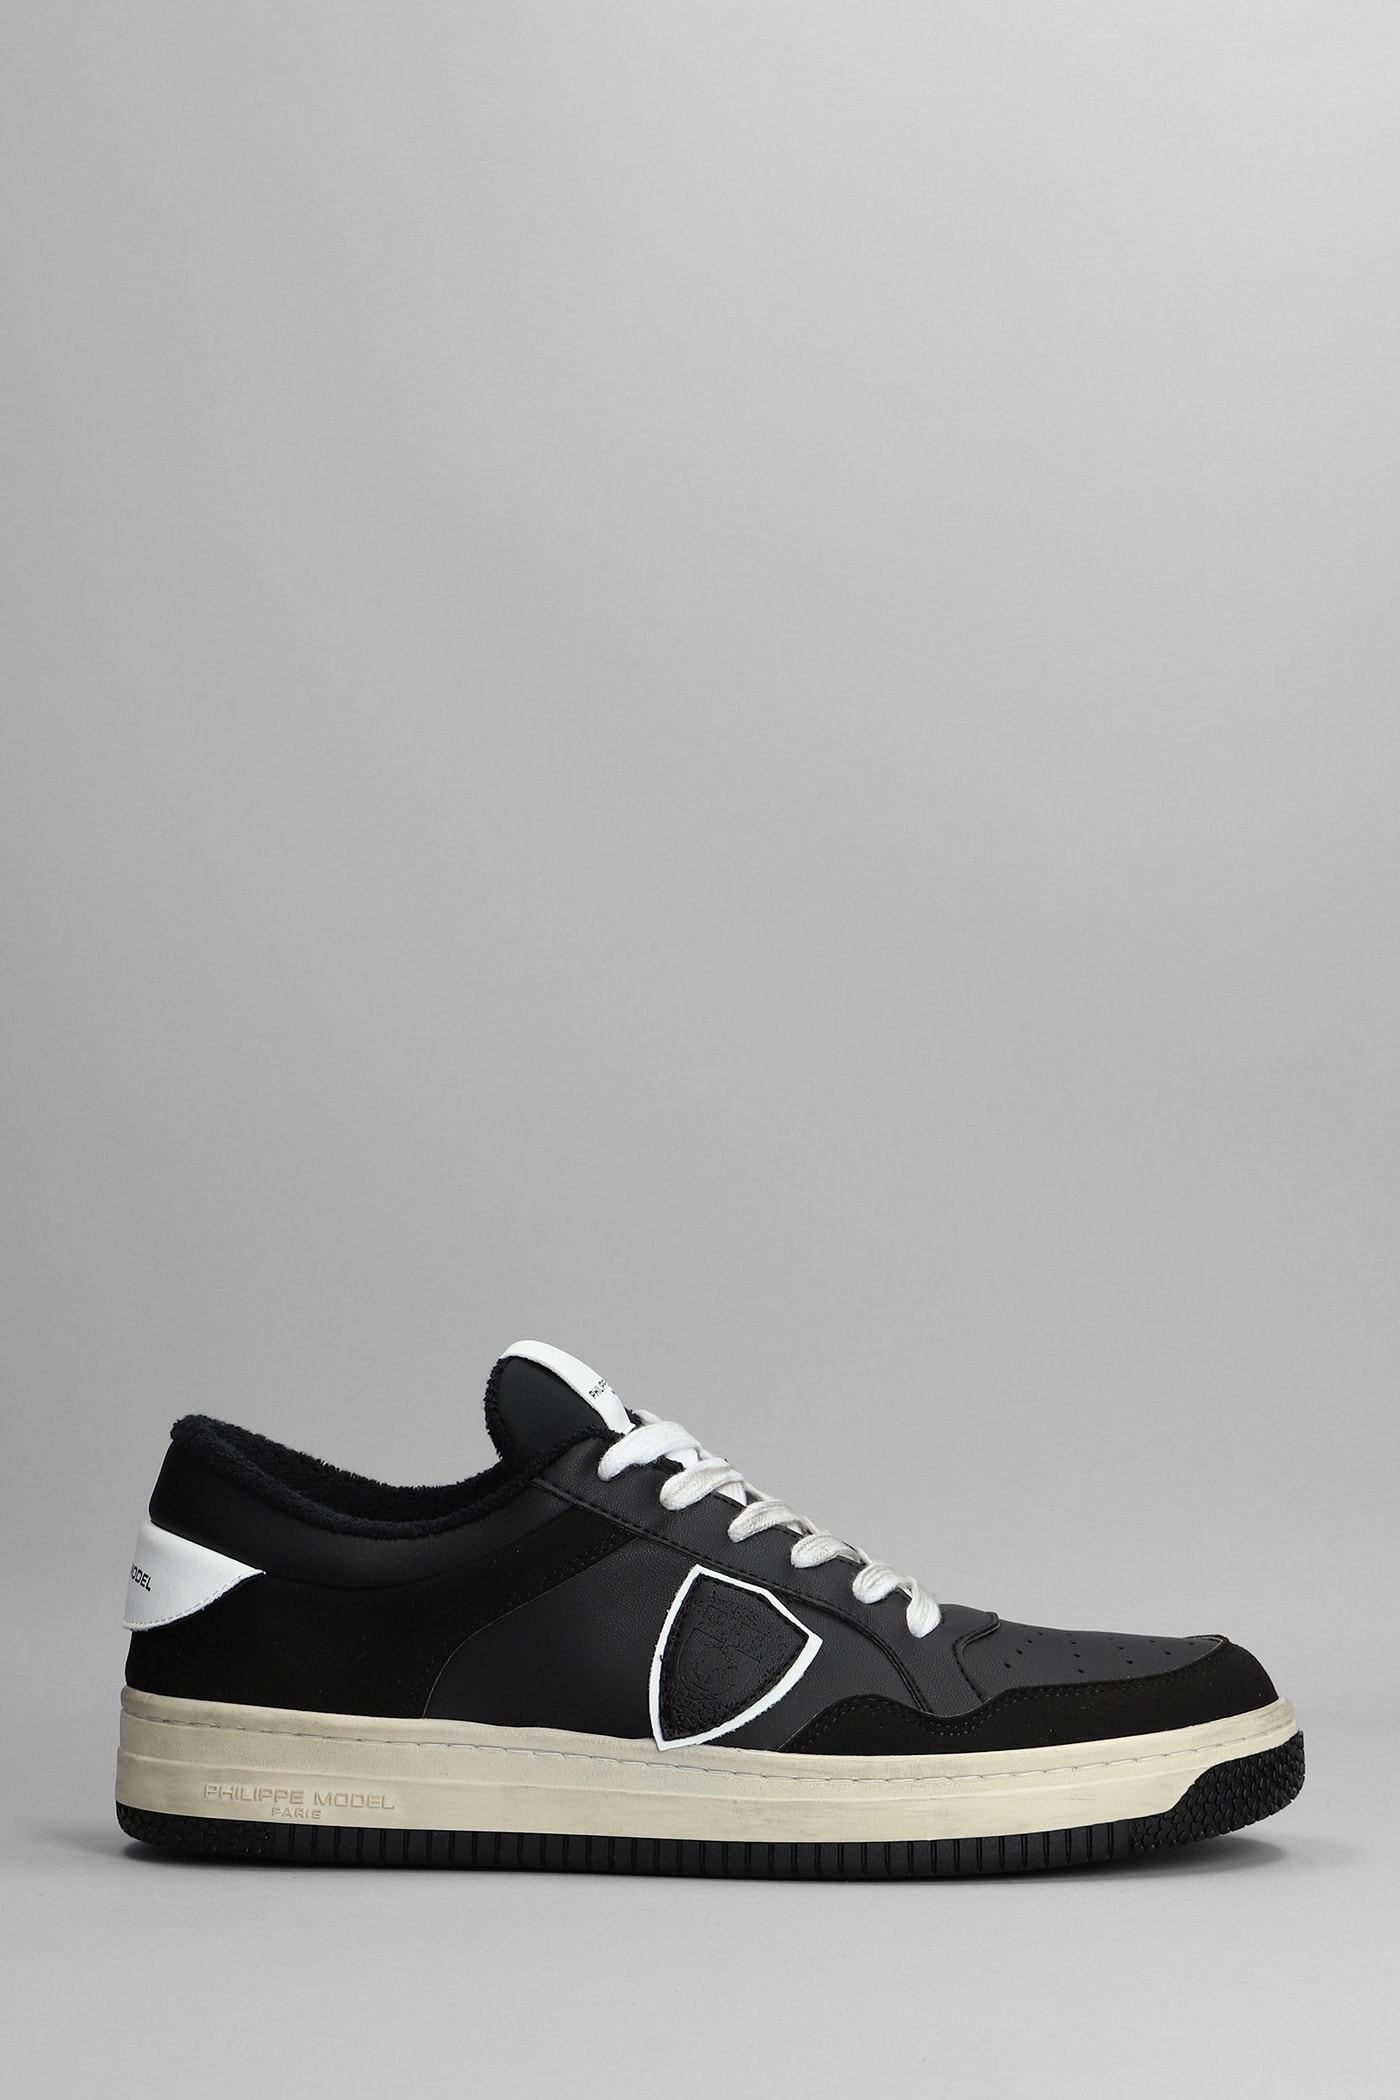 Philippe Model Lyon Sneakers In Black Suede And Leather